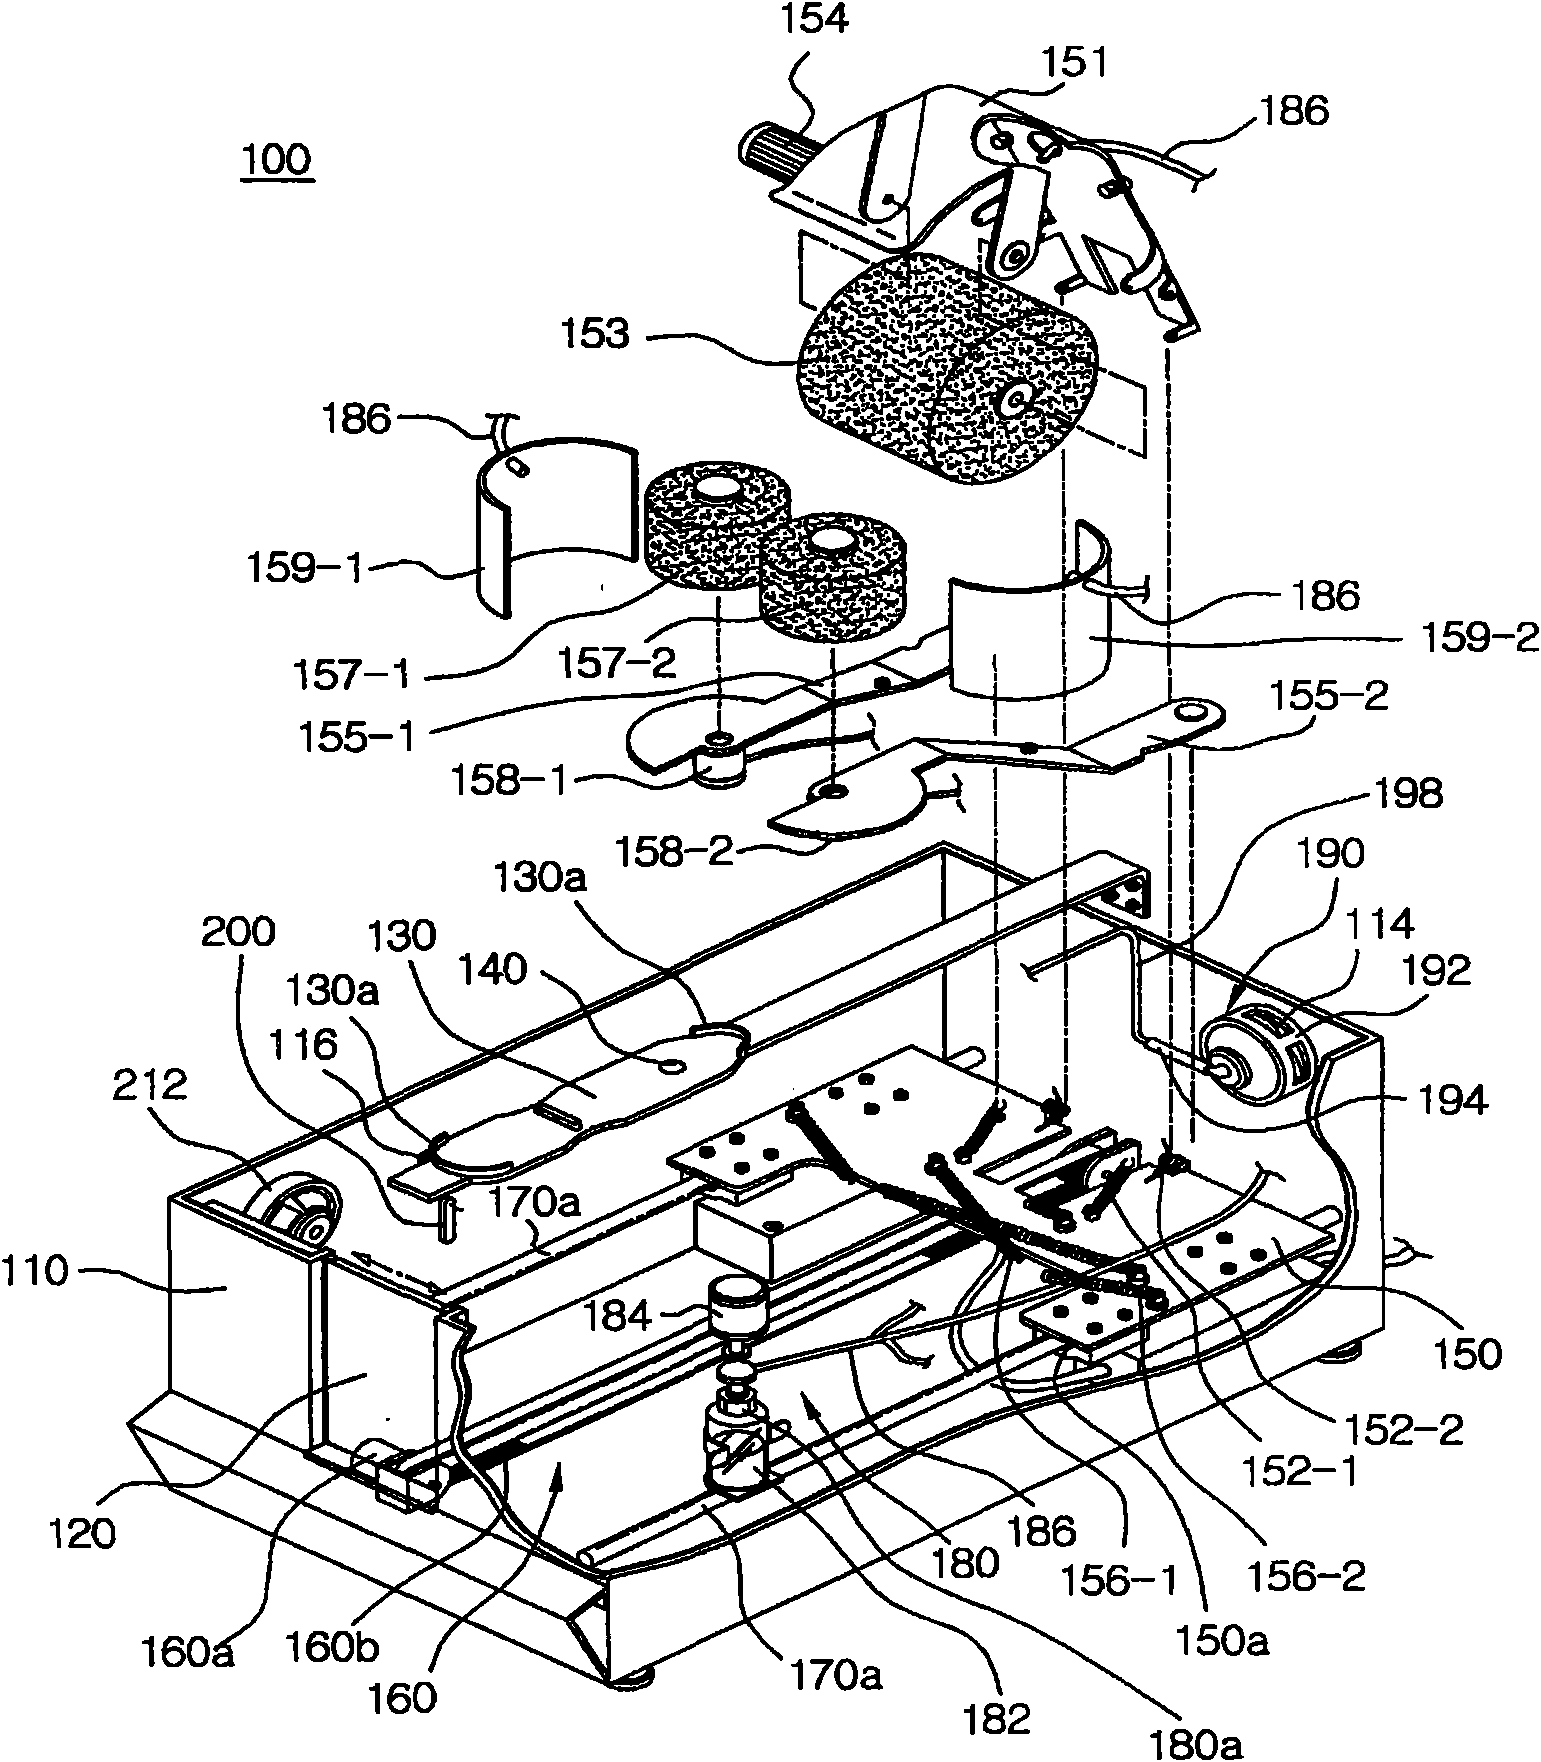 Apparatus for shining shoes